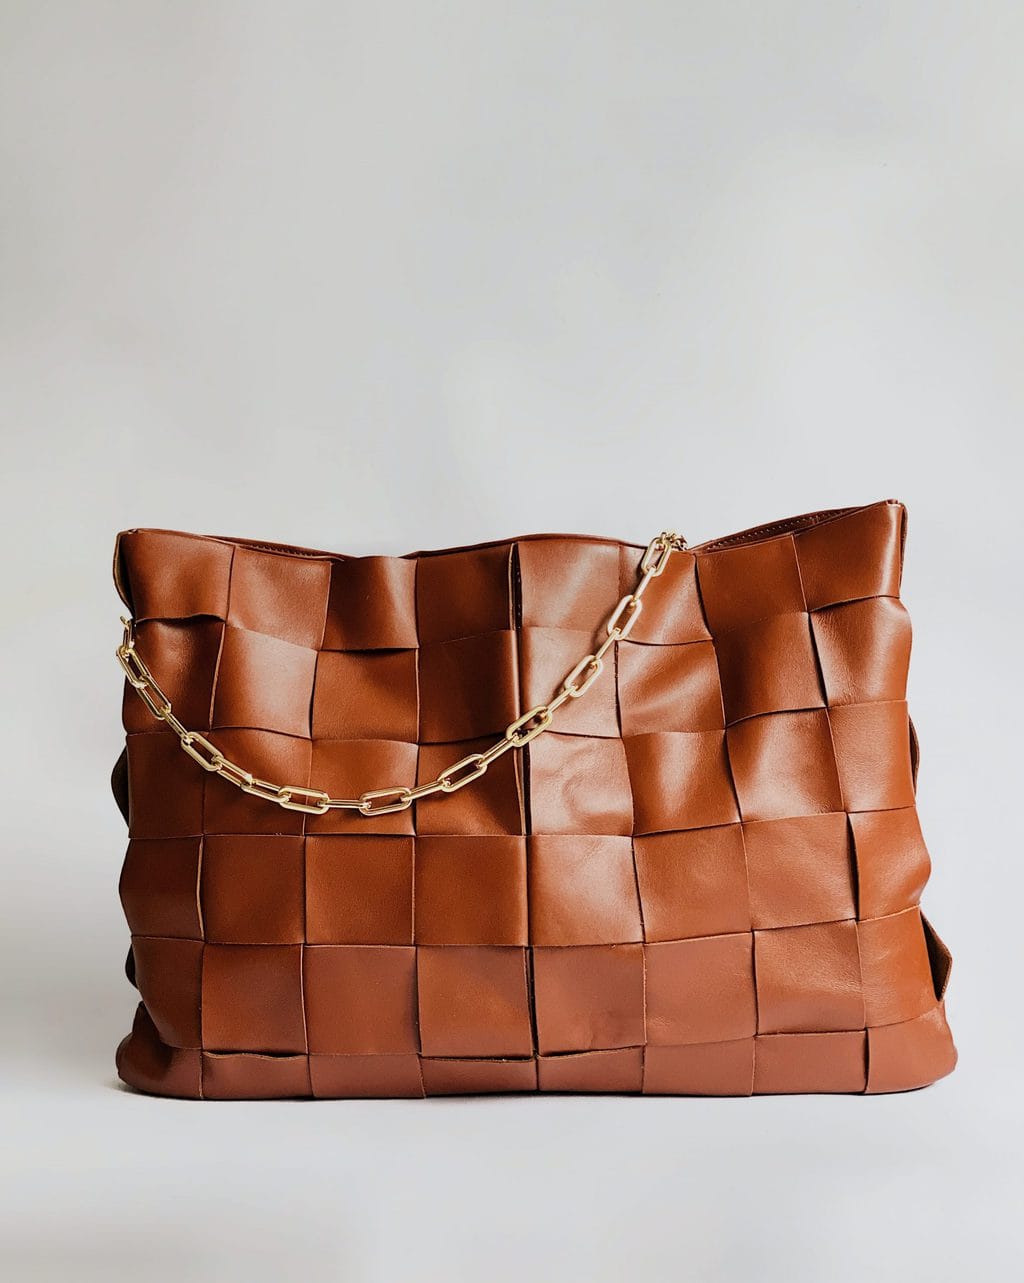 Handbags for work and parties – proven models